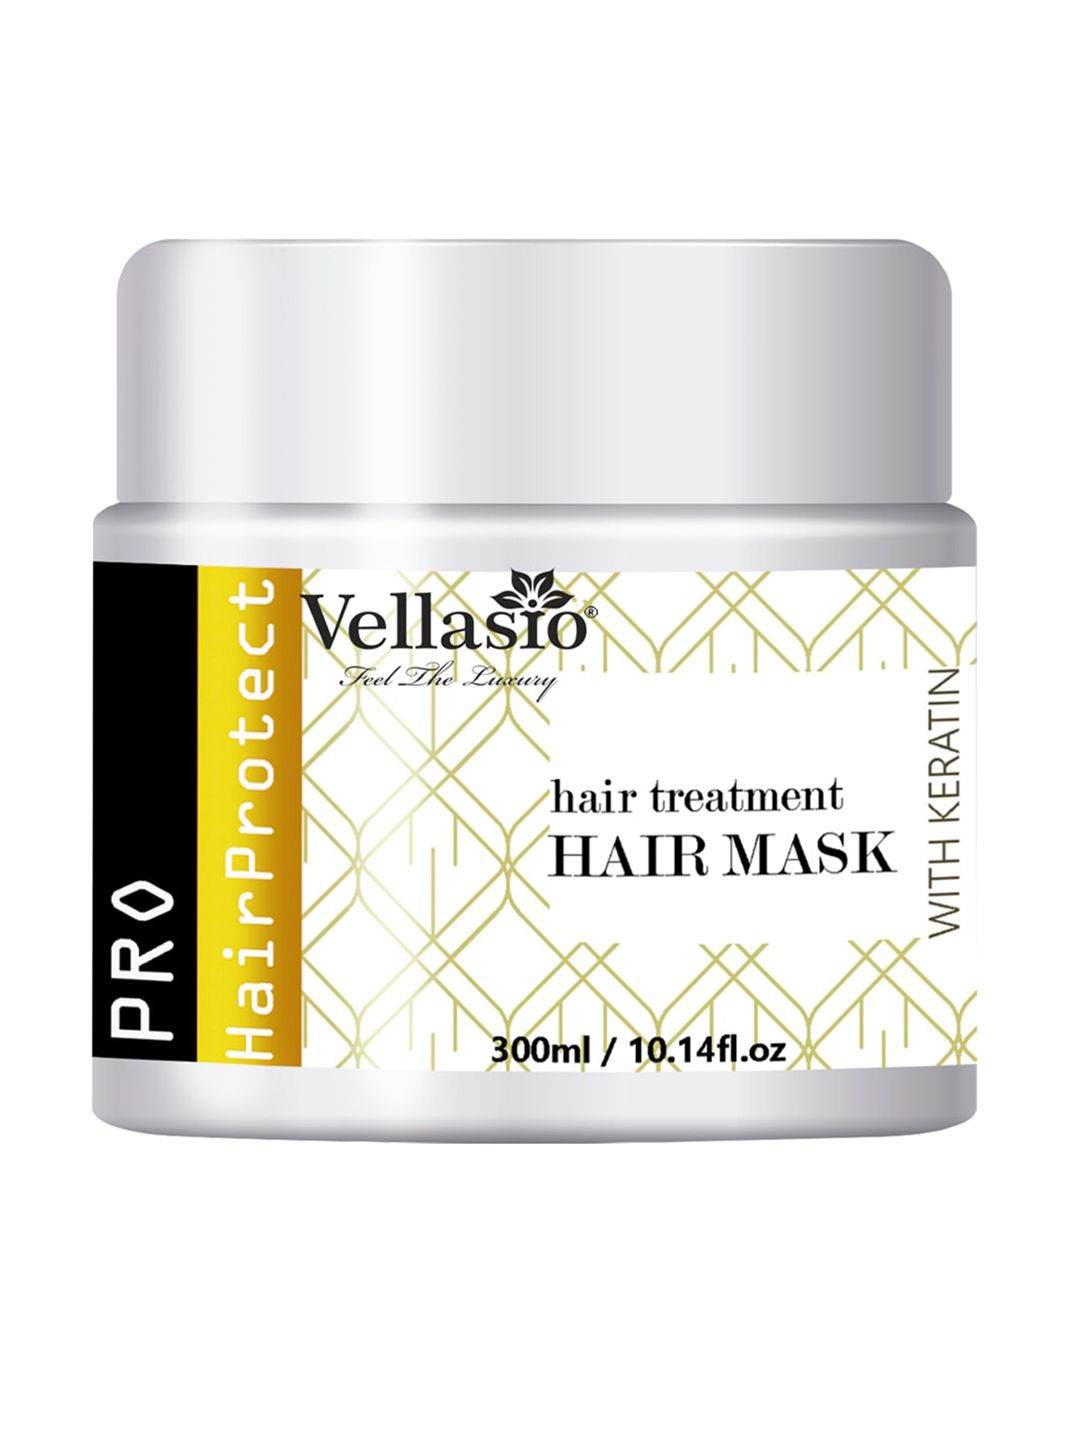 Vellasio Pro Hair Protect Intense Repair Hair Treatment Mask with Keratin - 300 ml Price in India